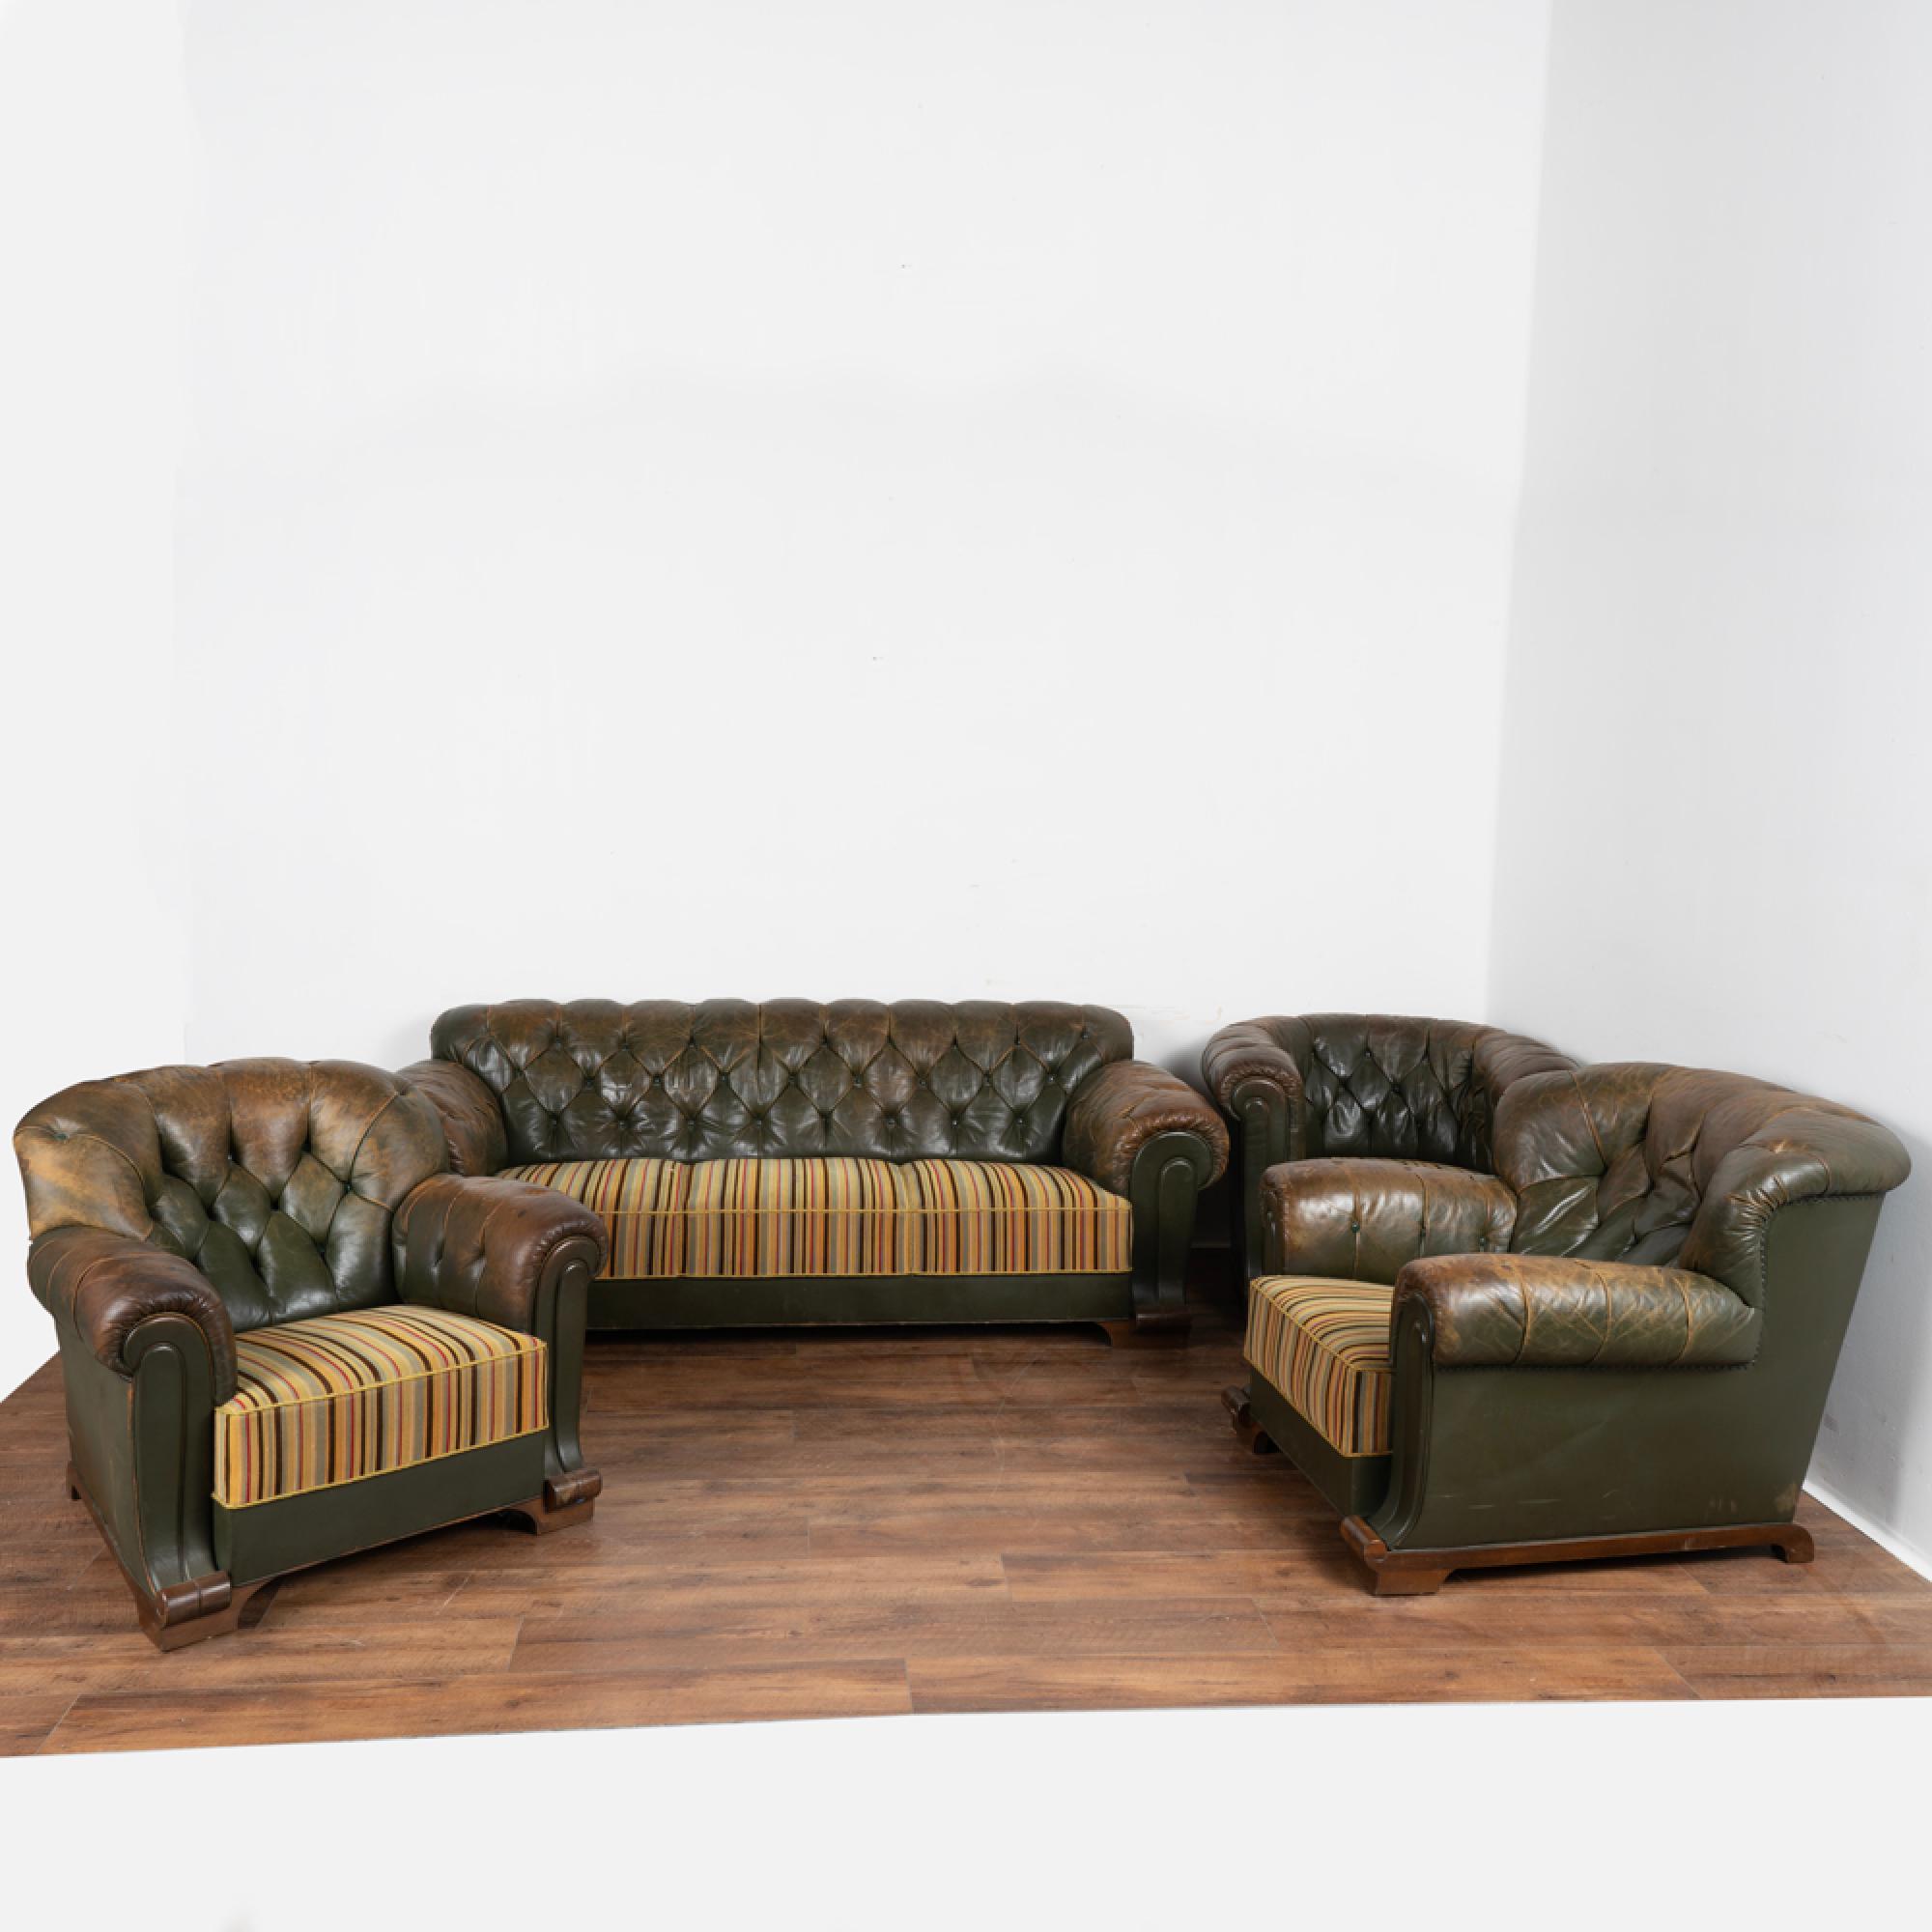 Chesterfield Sofa And Three Club Chairs